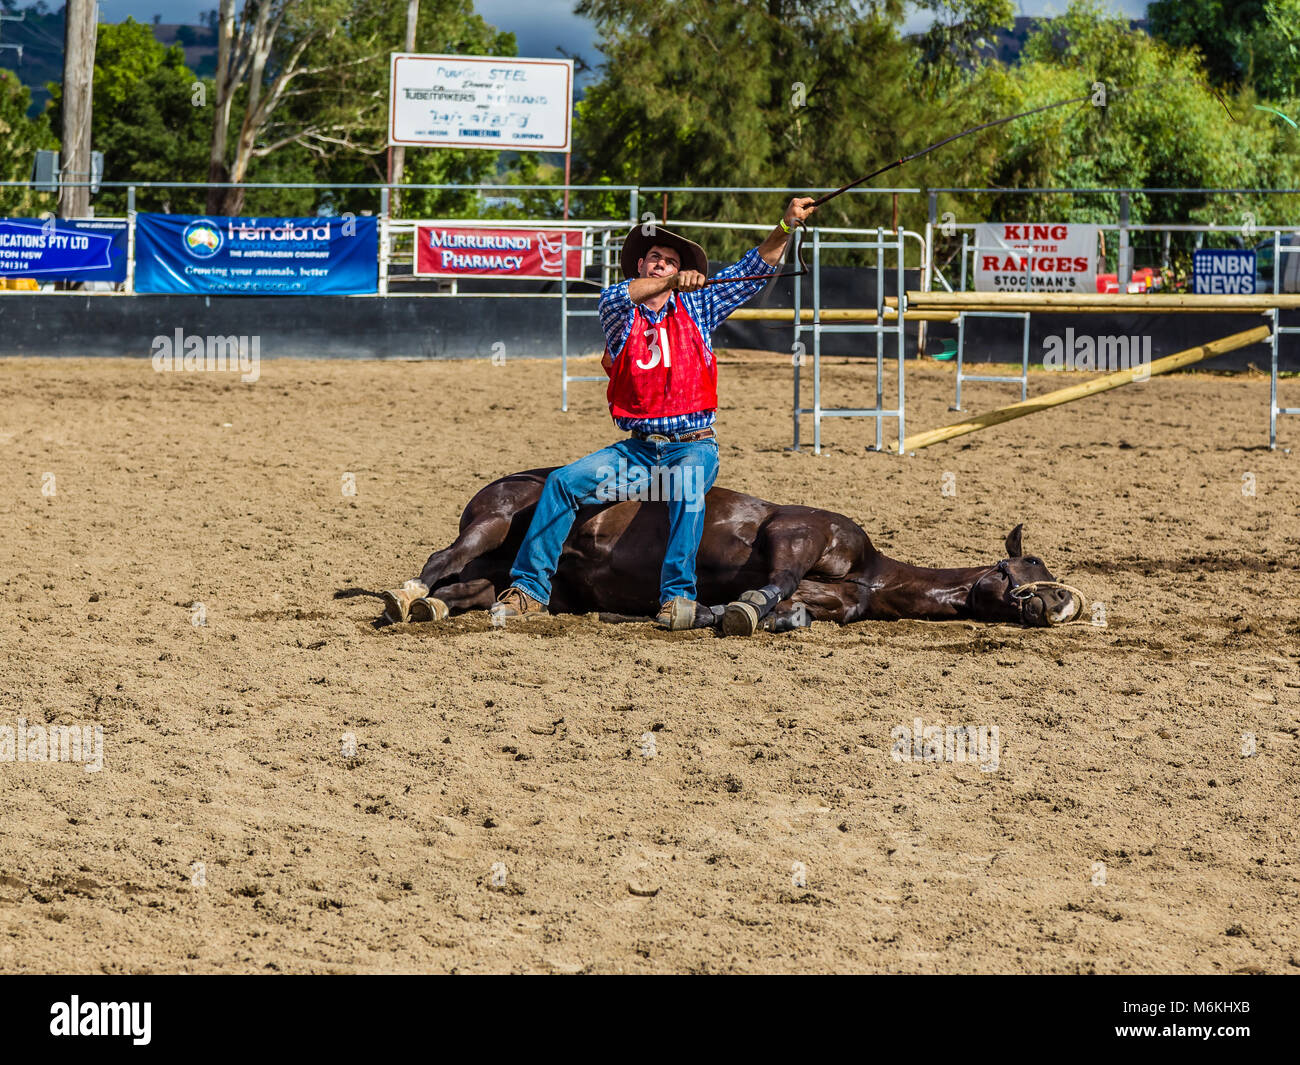 Man cracking his whip, while his horse lies motionless. in the King of the Ranges Bareback Freestyle Competition in Murrurundi, NSW, Australia, 2018 Stock Photo